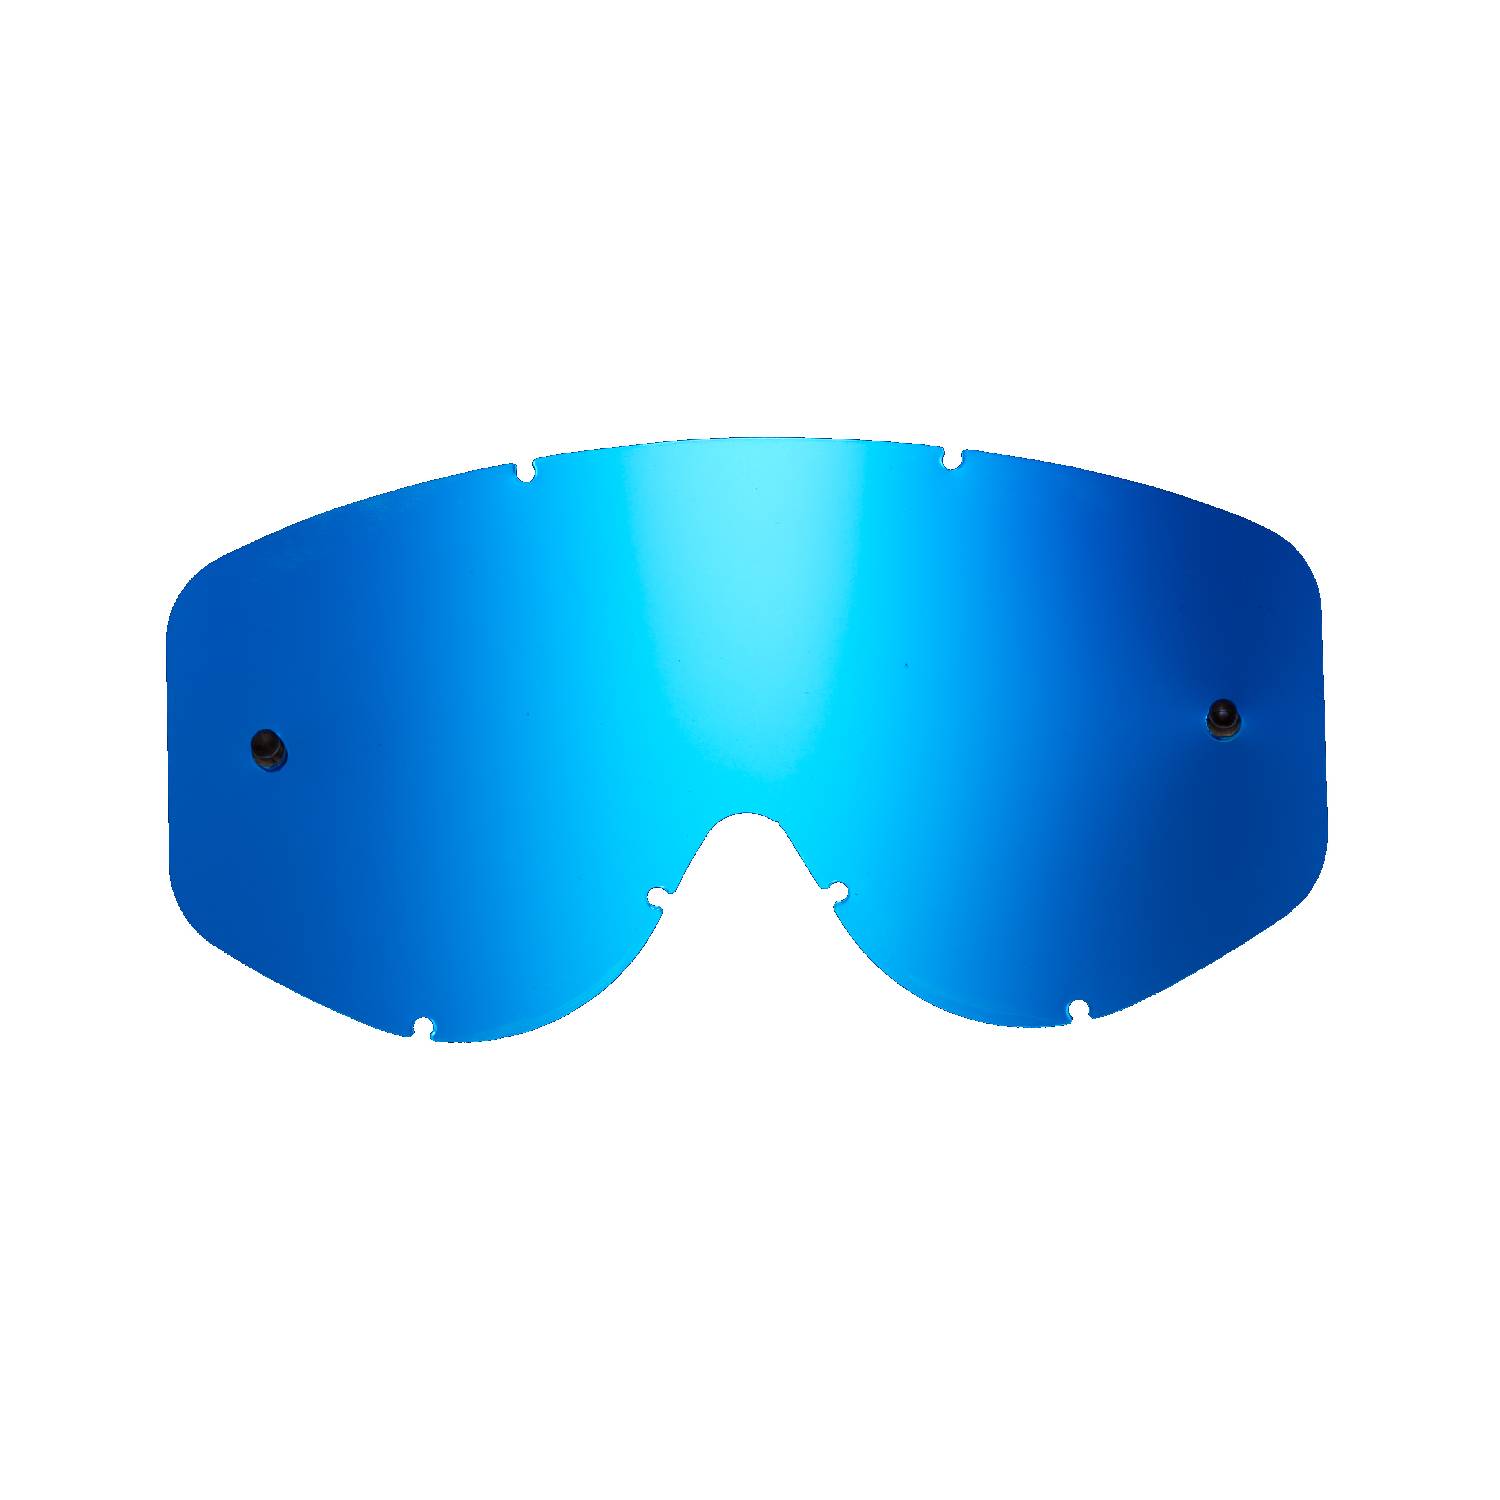 blue-toned mirrored replacement lenses for goggles compatible for Scott 83/89 / Recoil / 89 Xi goggle